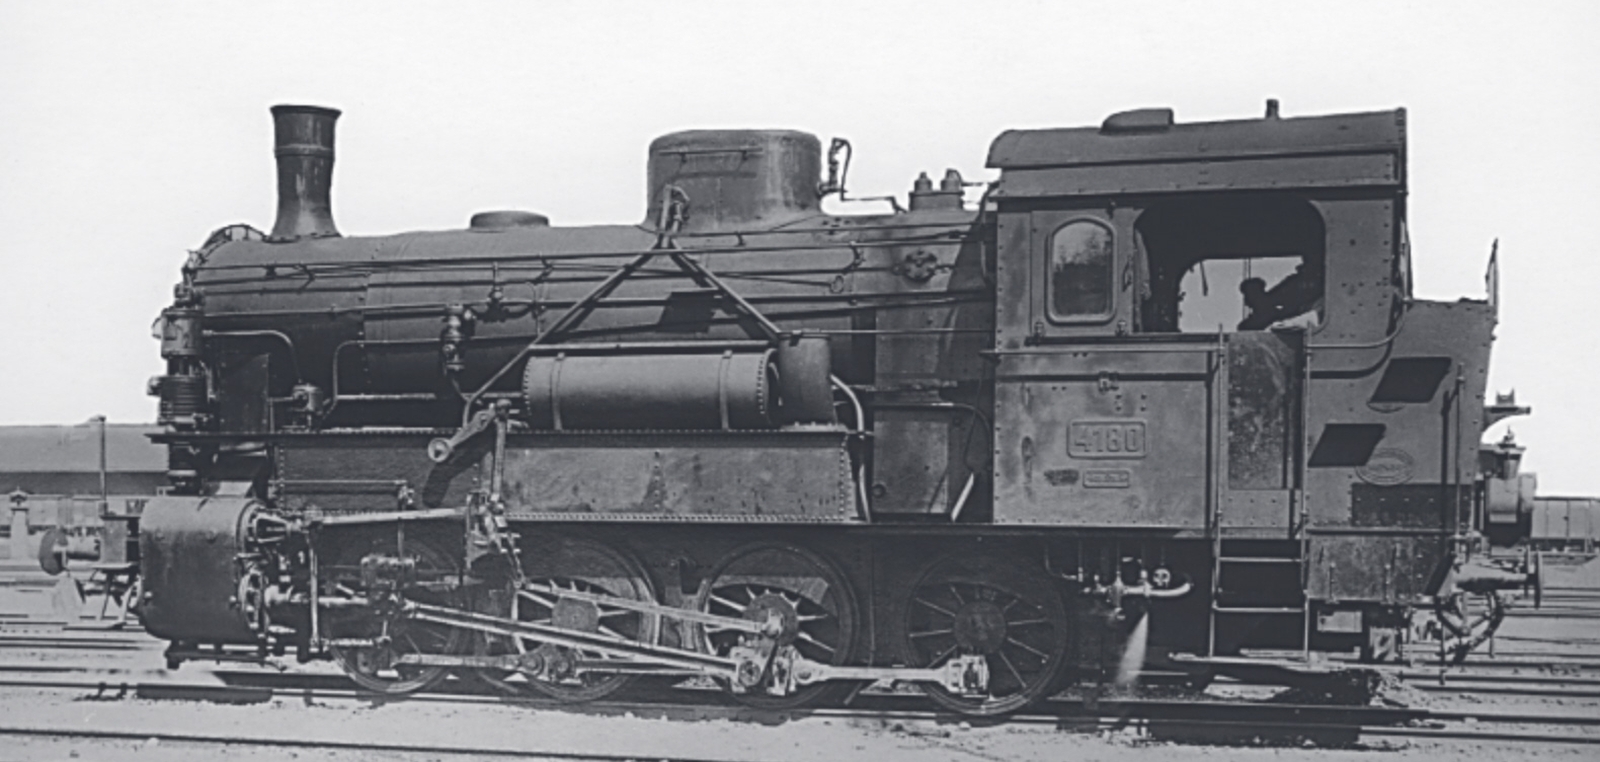 No. 4180 in the transitional period to the Reichsbahn, here still with Länderbahn markings